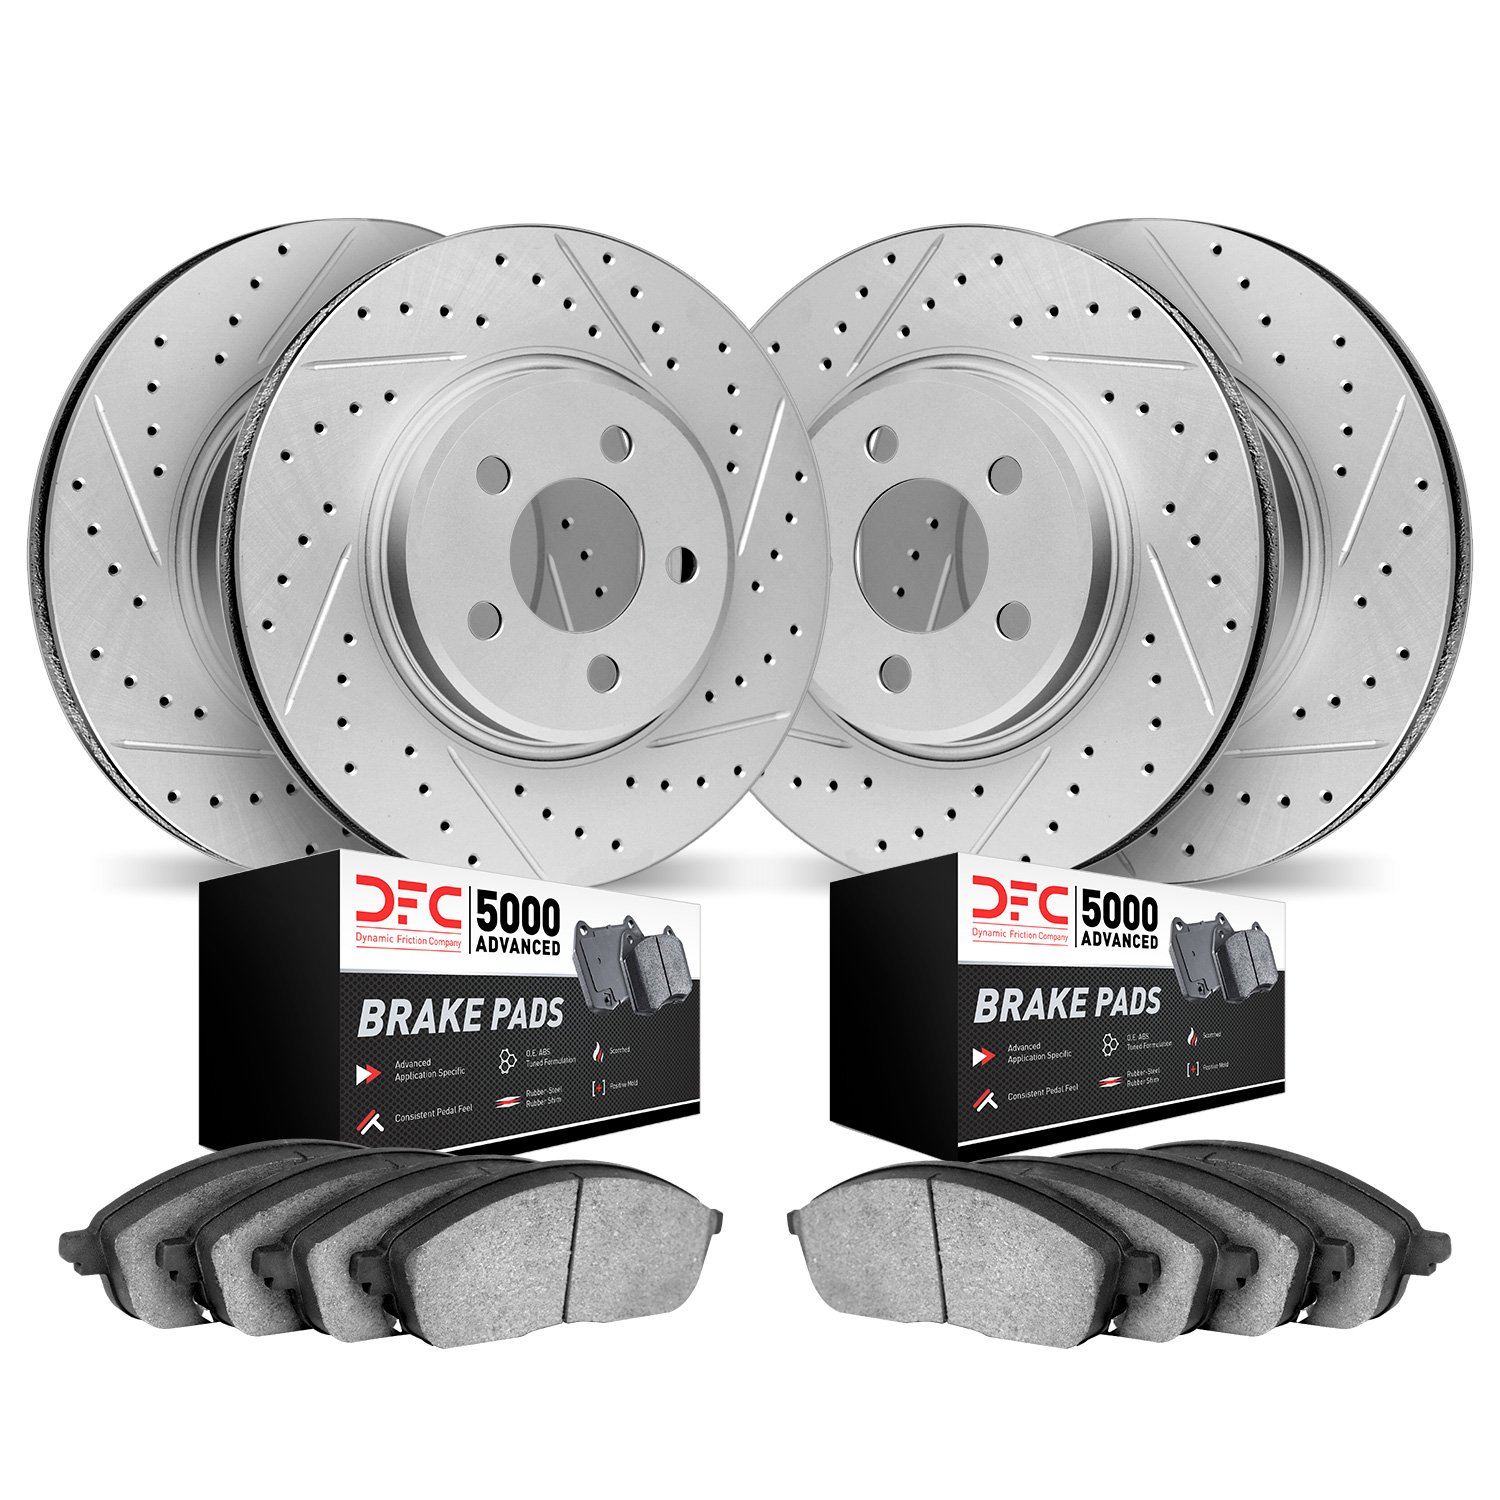 2504-54221 Geoperformance Drilled/Slotted Rotors w/5000 Advanced Brake Pads Kit, 2007-2010 Ford/Lincoln/Mercury/Mazda, Position: